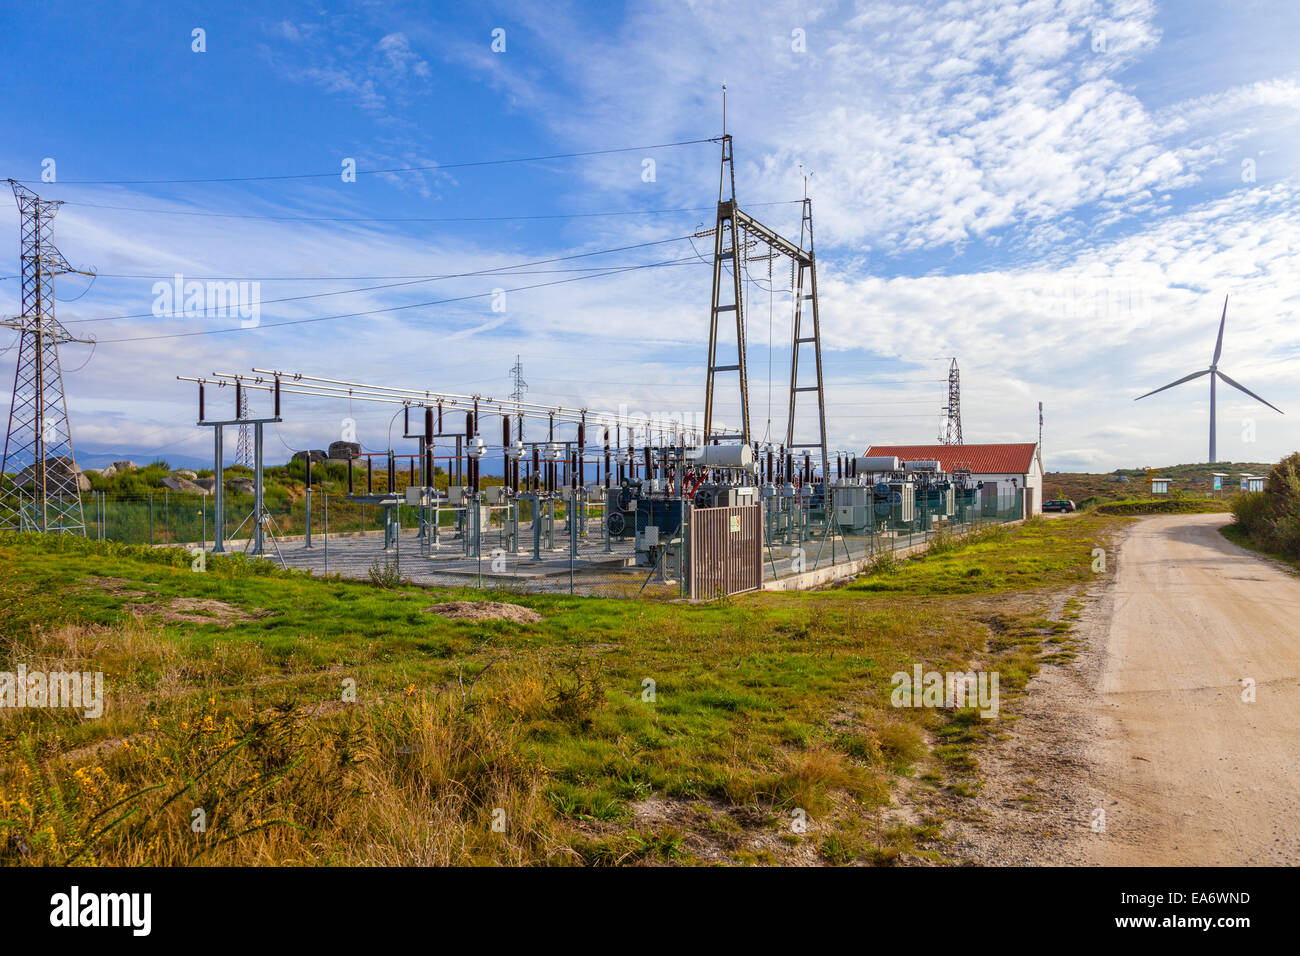 Collector Substation for a wind farm. Connected to the wind power turbine generators in Terras Altas de Fafe Portugal Stock Photo